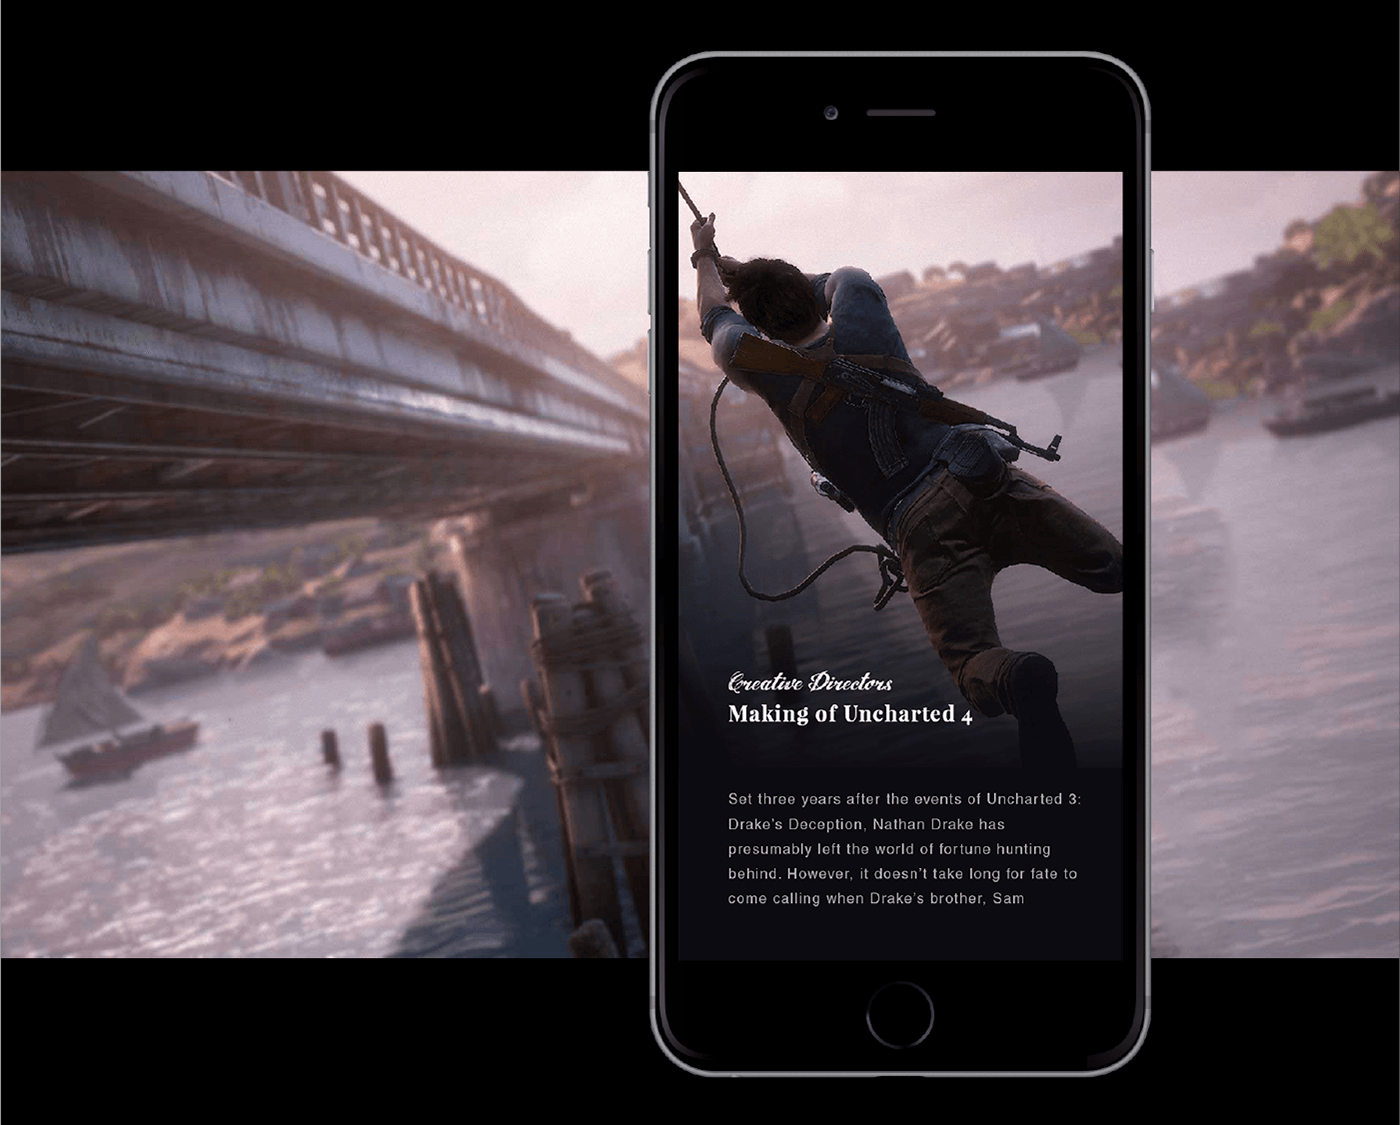 Adobe Portfolio Uncharted 4 Uncharted 4: A Thief's End A Thief's End naughty dog playstation 4 Sony Gaming Games Web action adventure